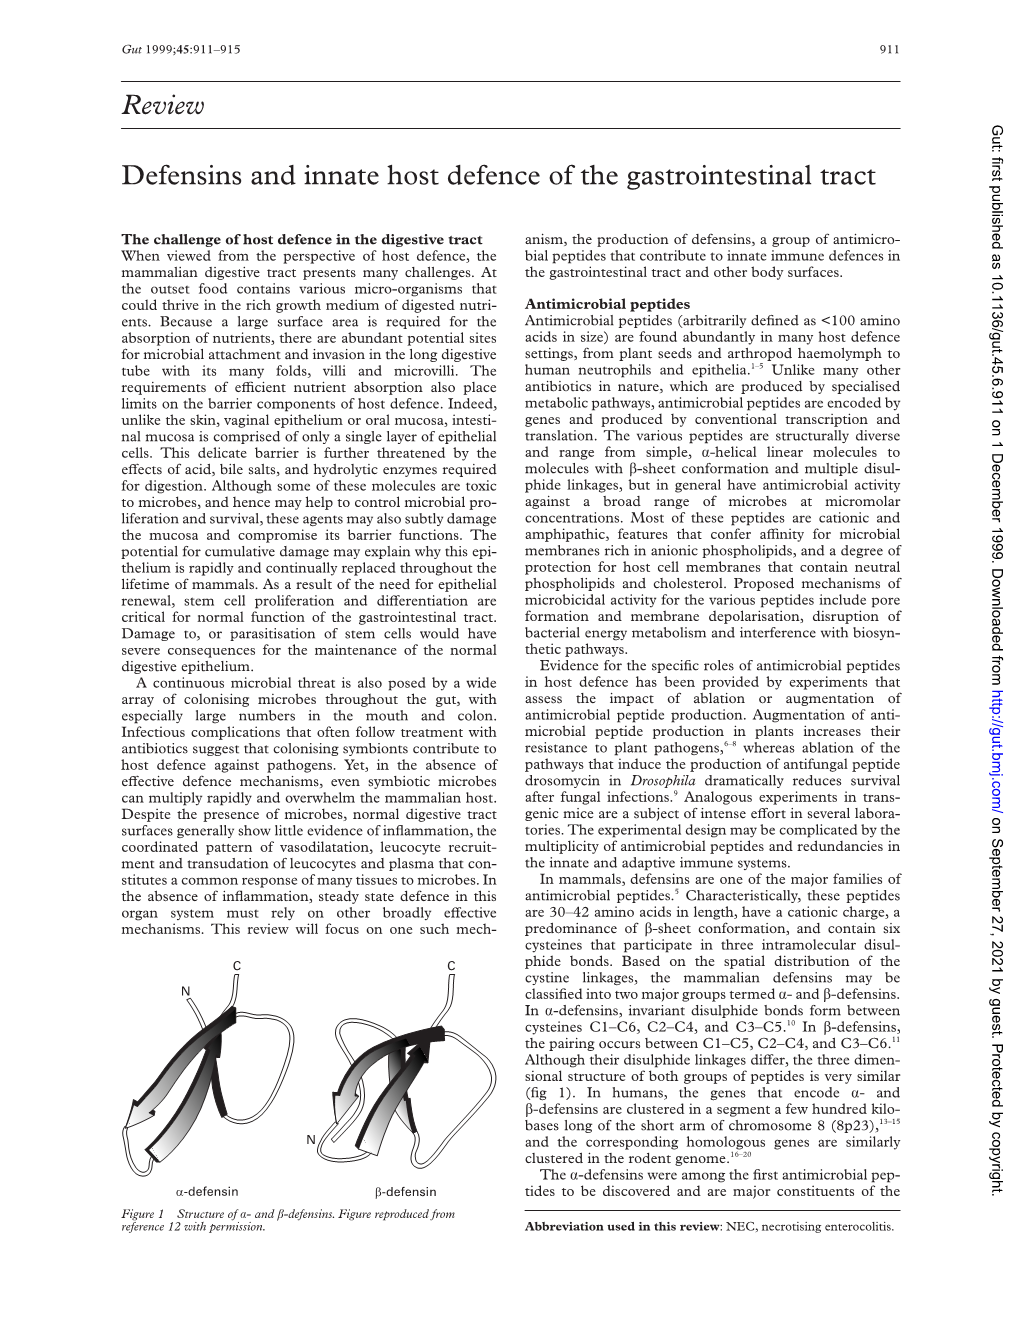 Review Defensins and Innate Host Defence of the Gastrointestinal Tract